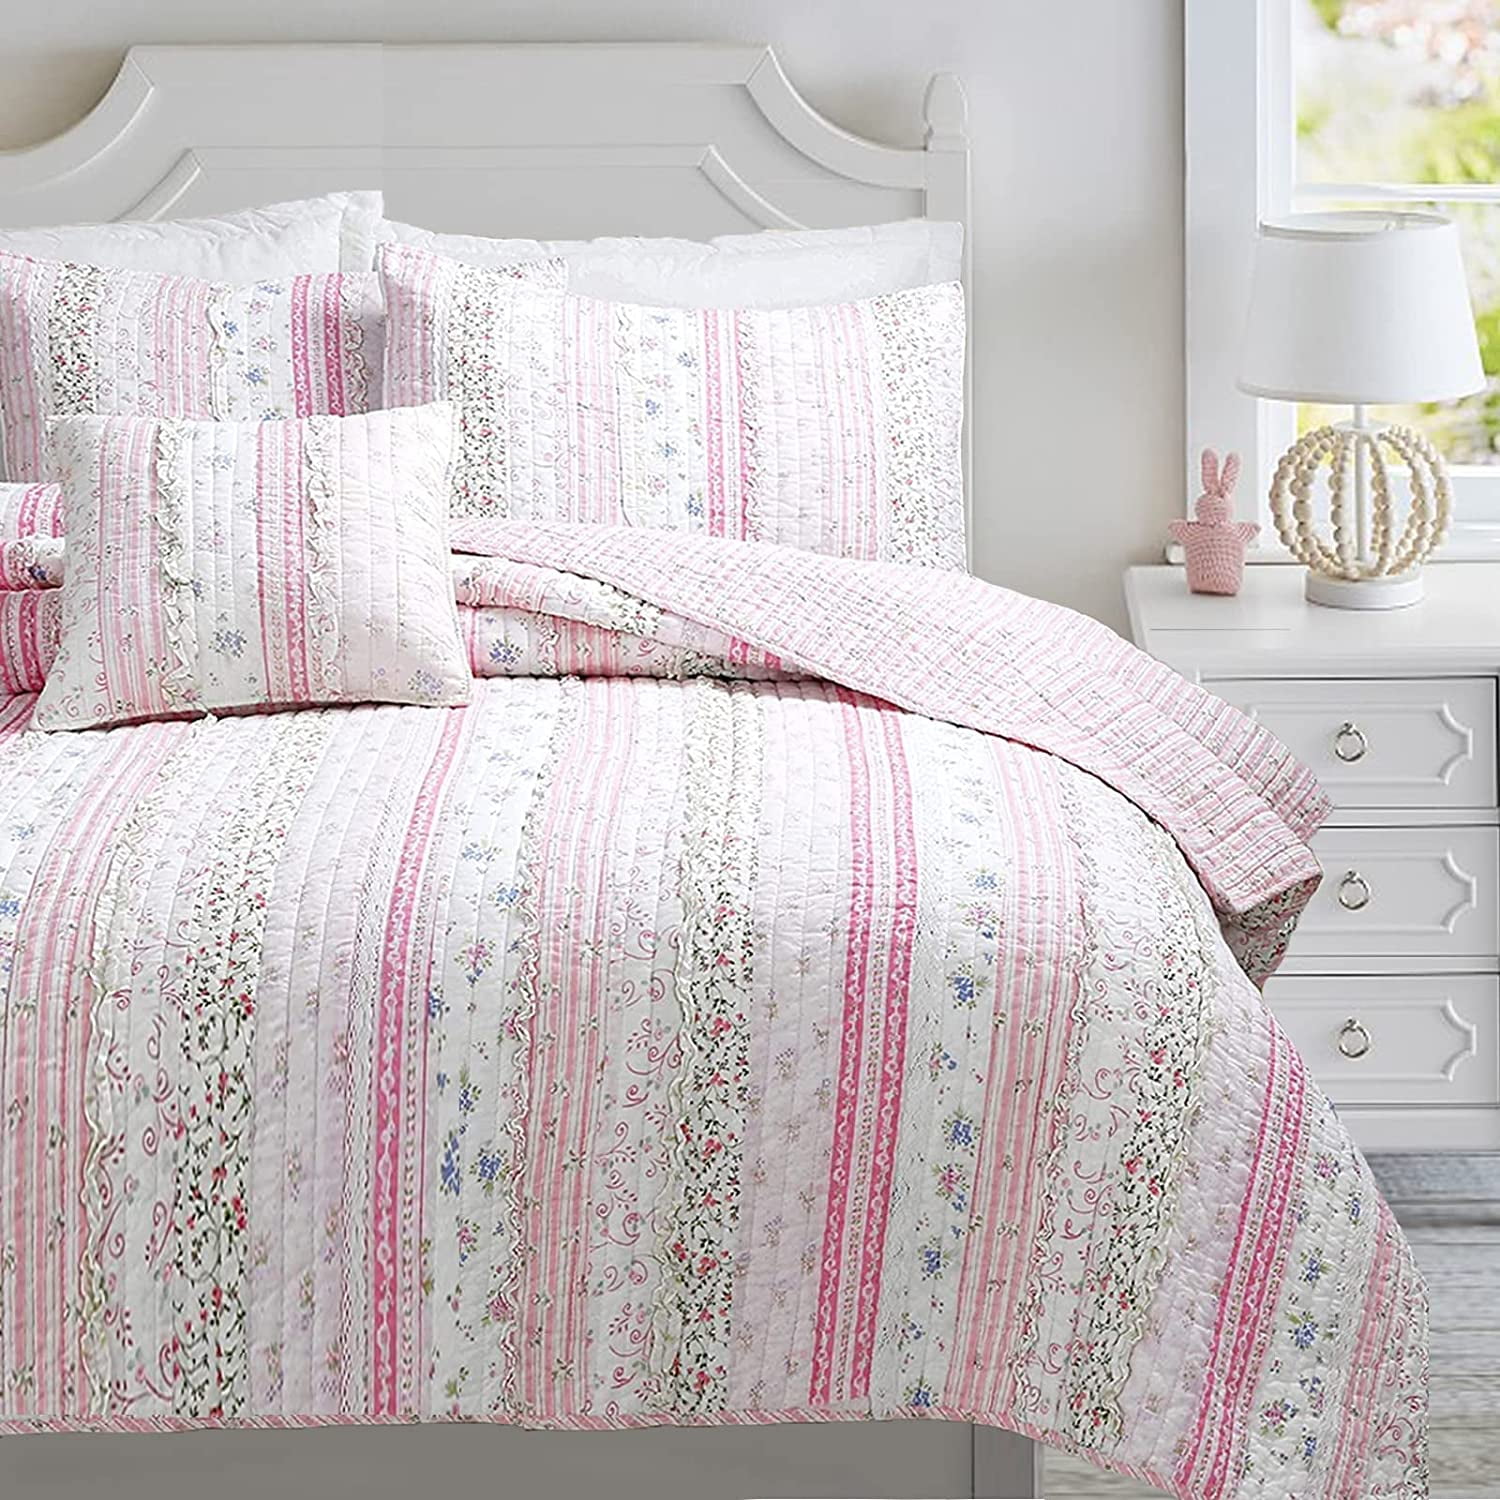 Country Cottage Pink Floral 100% Cotton Bedspread Quilt Coverlet Shabby Chic 